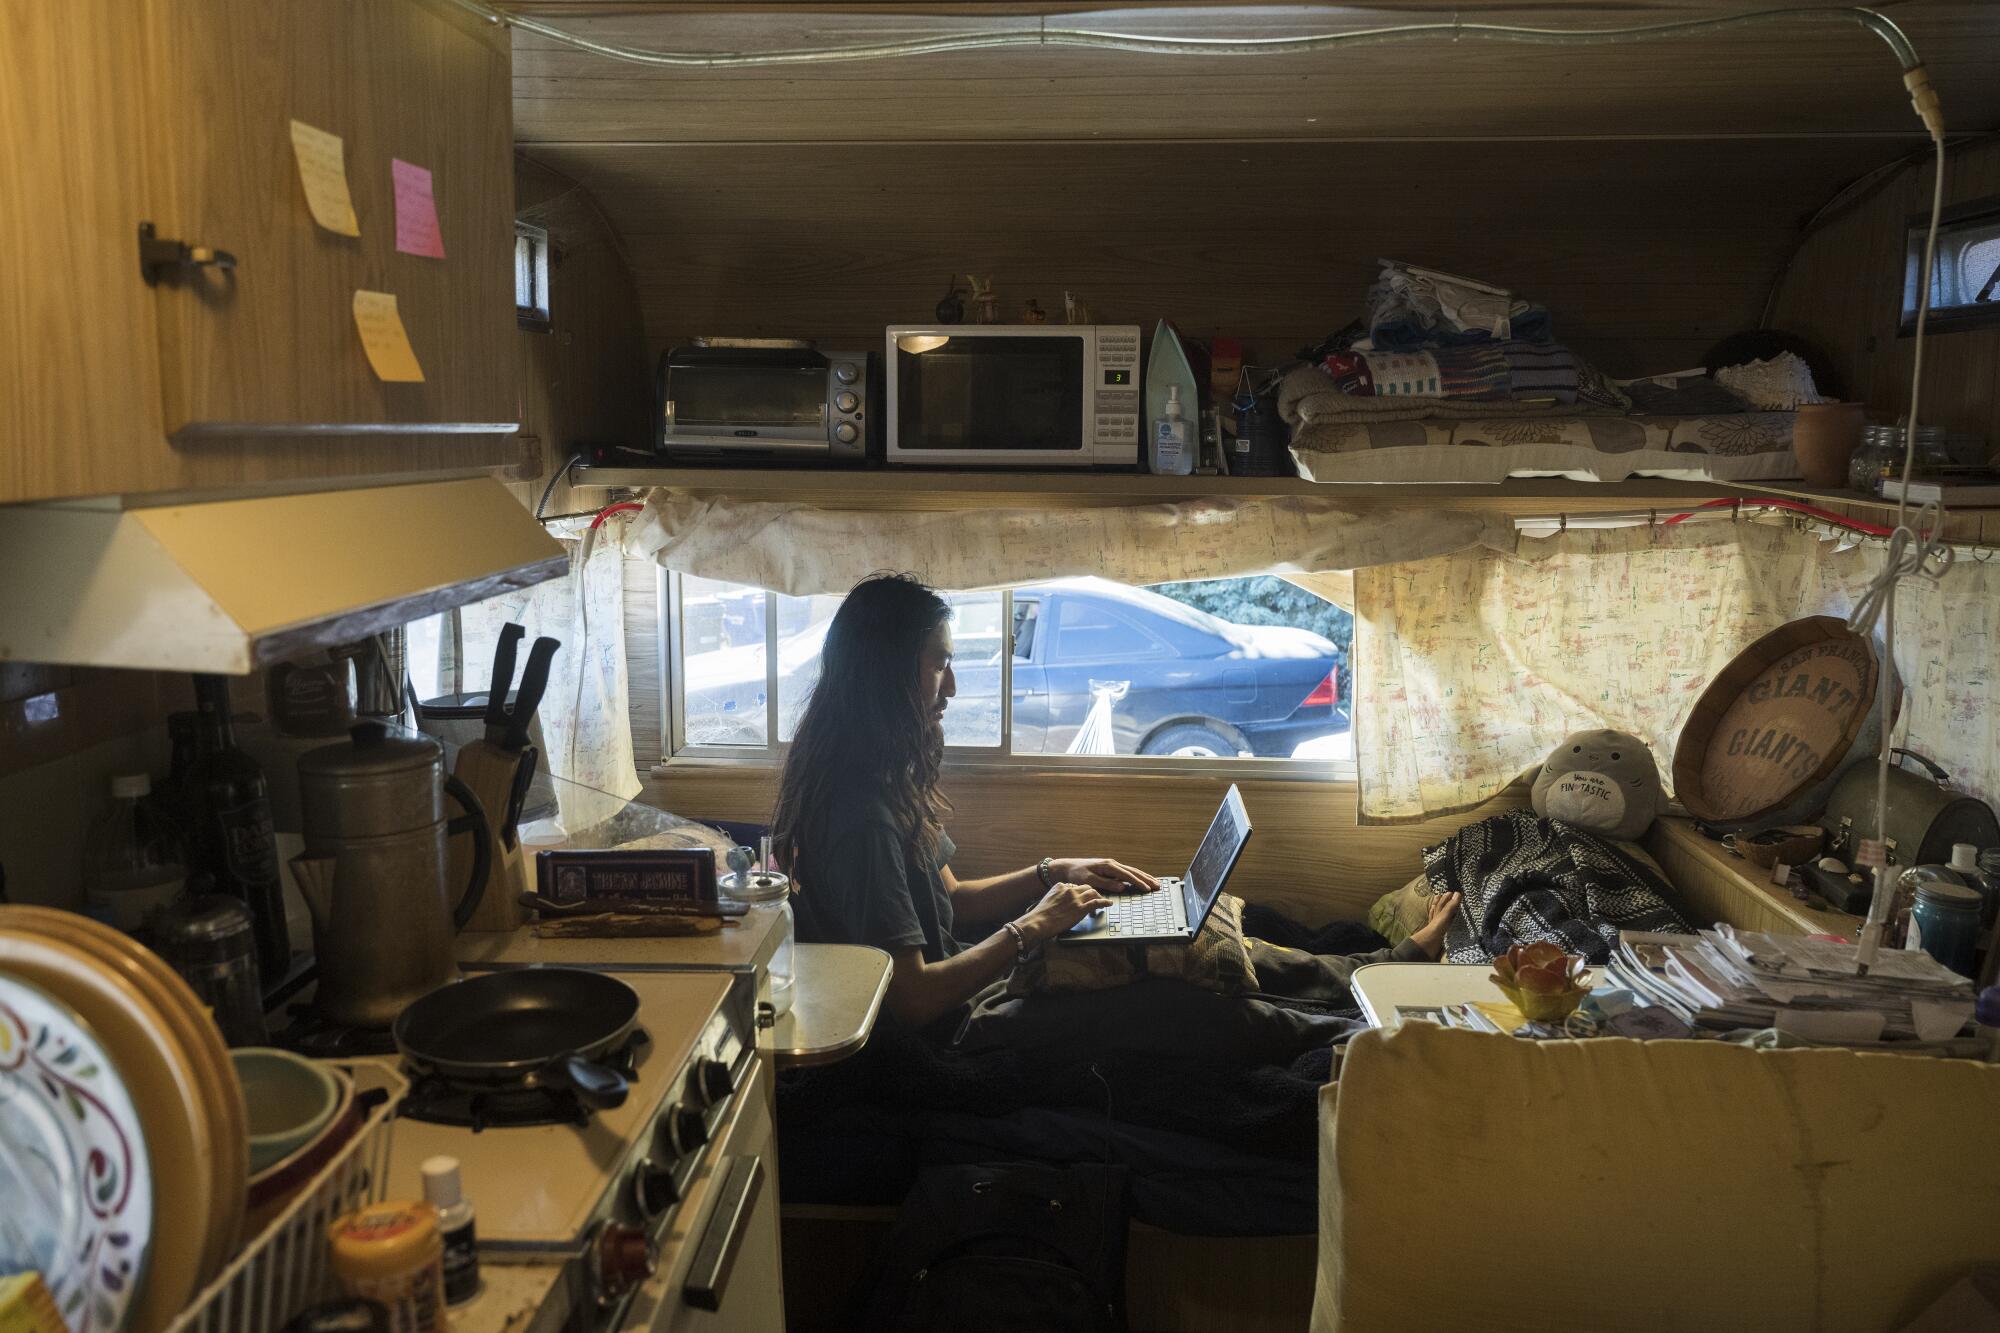 A man works on a laptop in a trailer